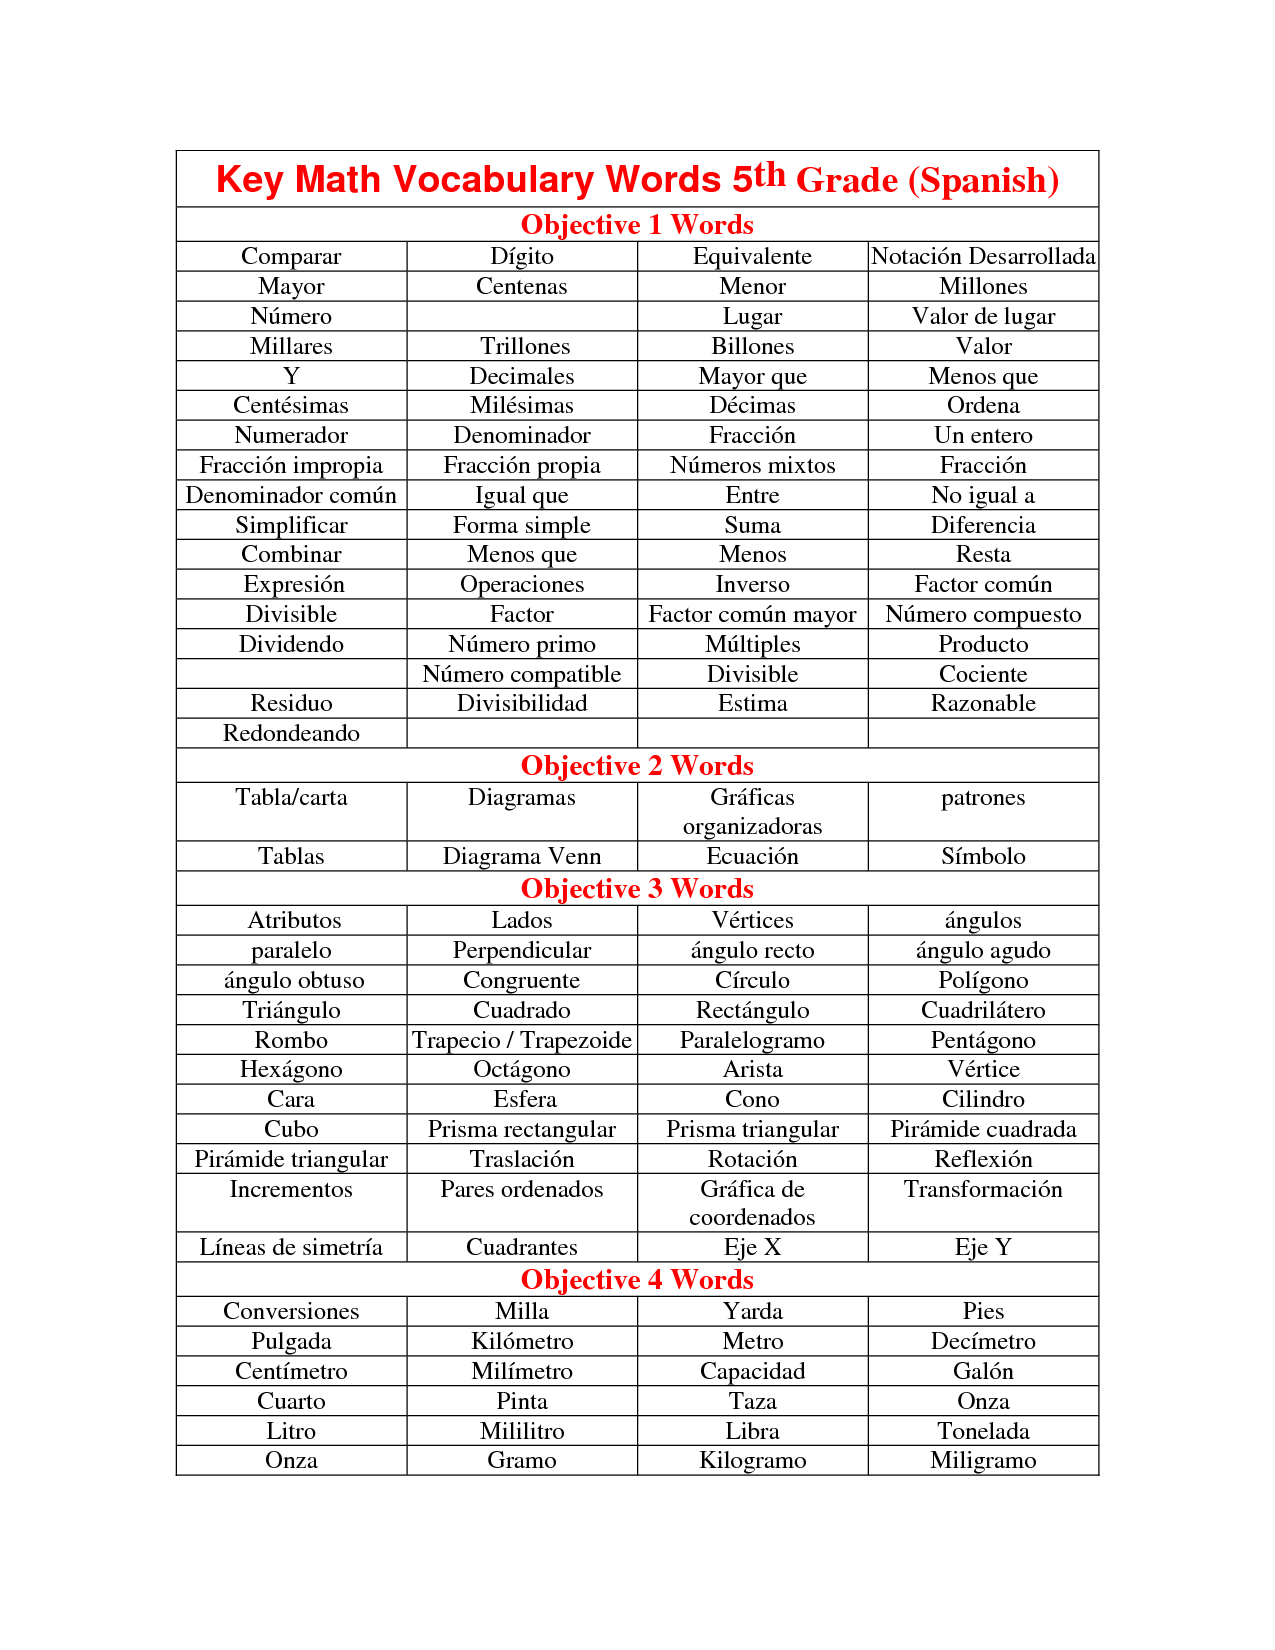 17-best-images-of-5th-grade-vocabulary-worksheets-printable-5th-grade